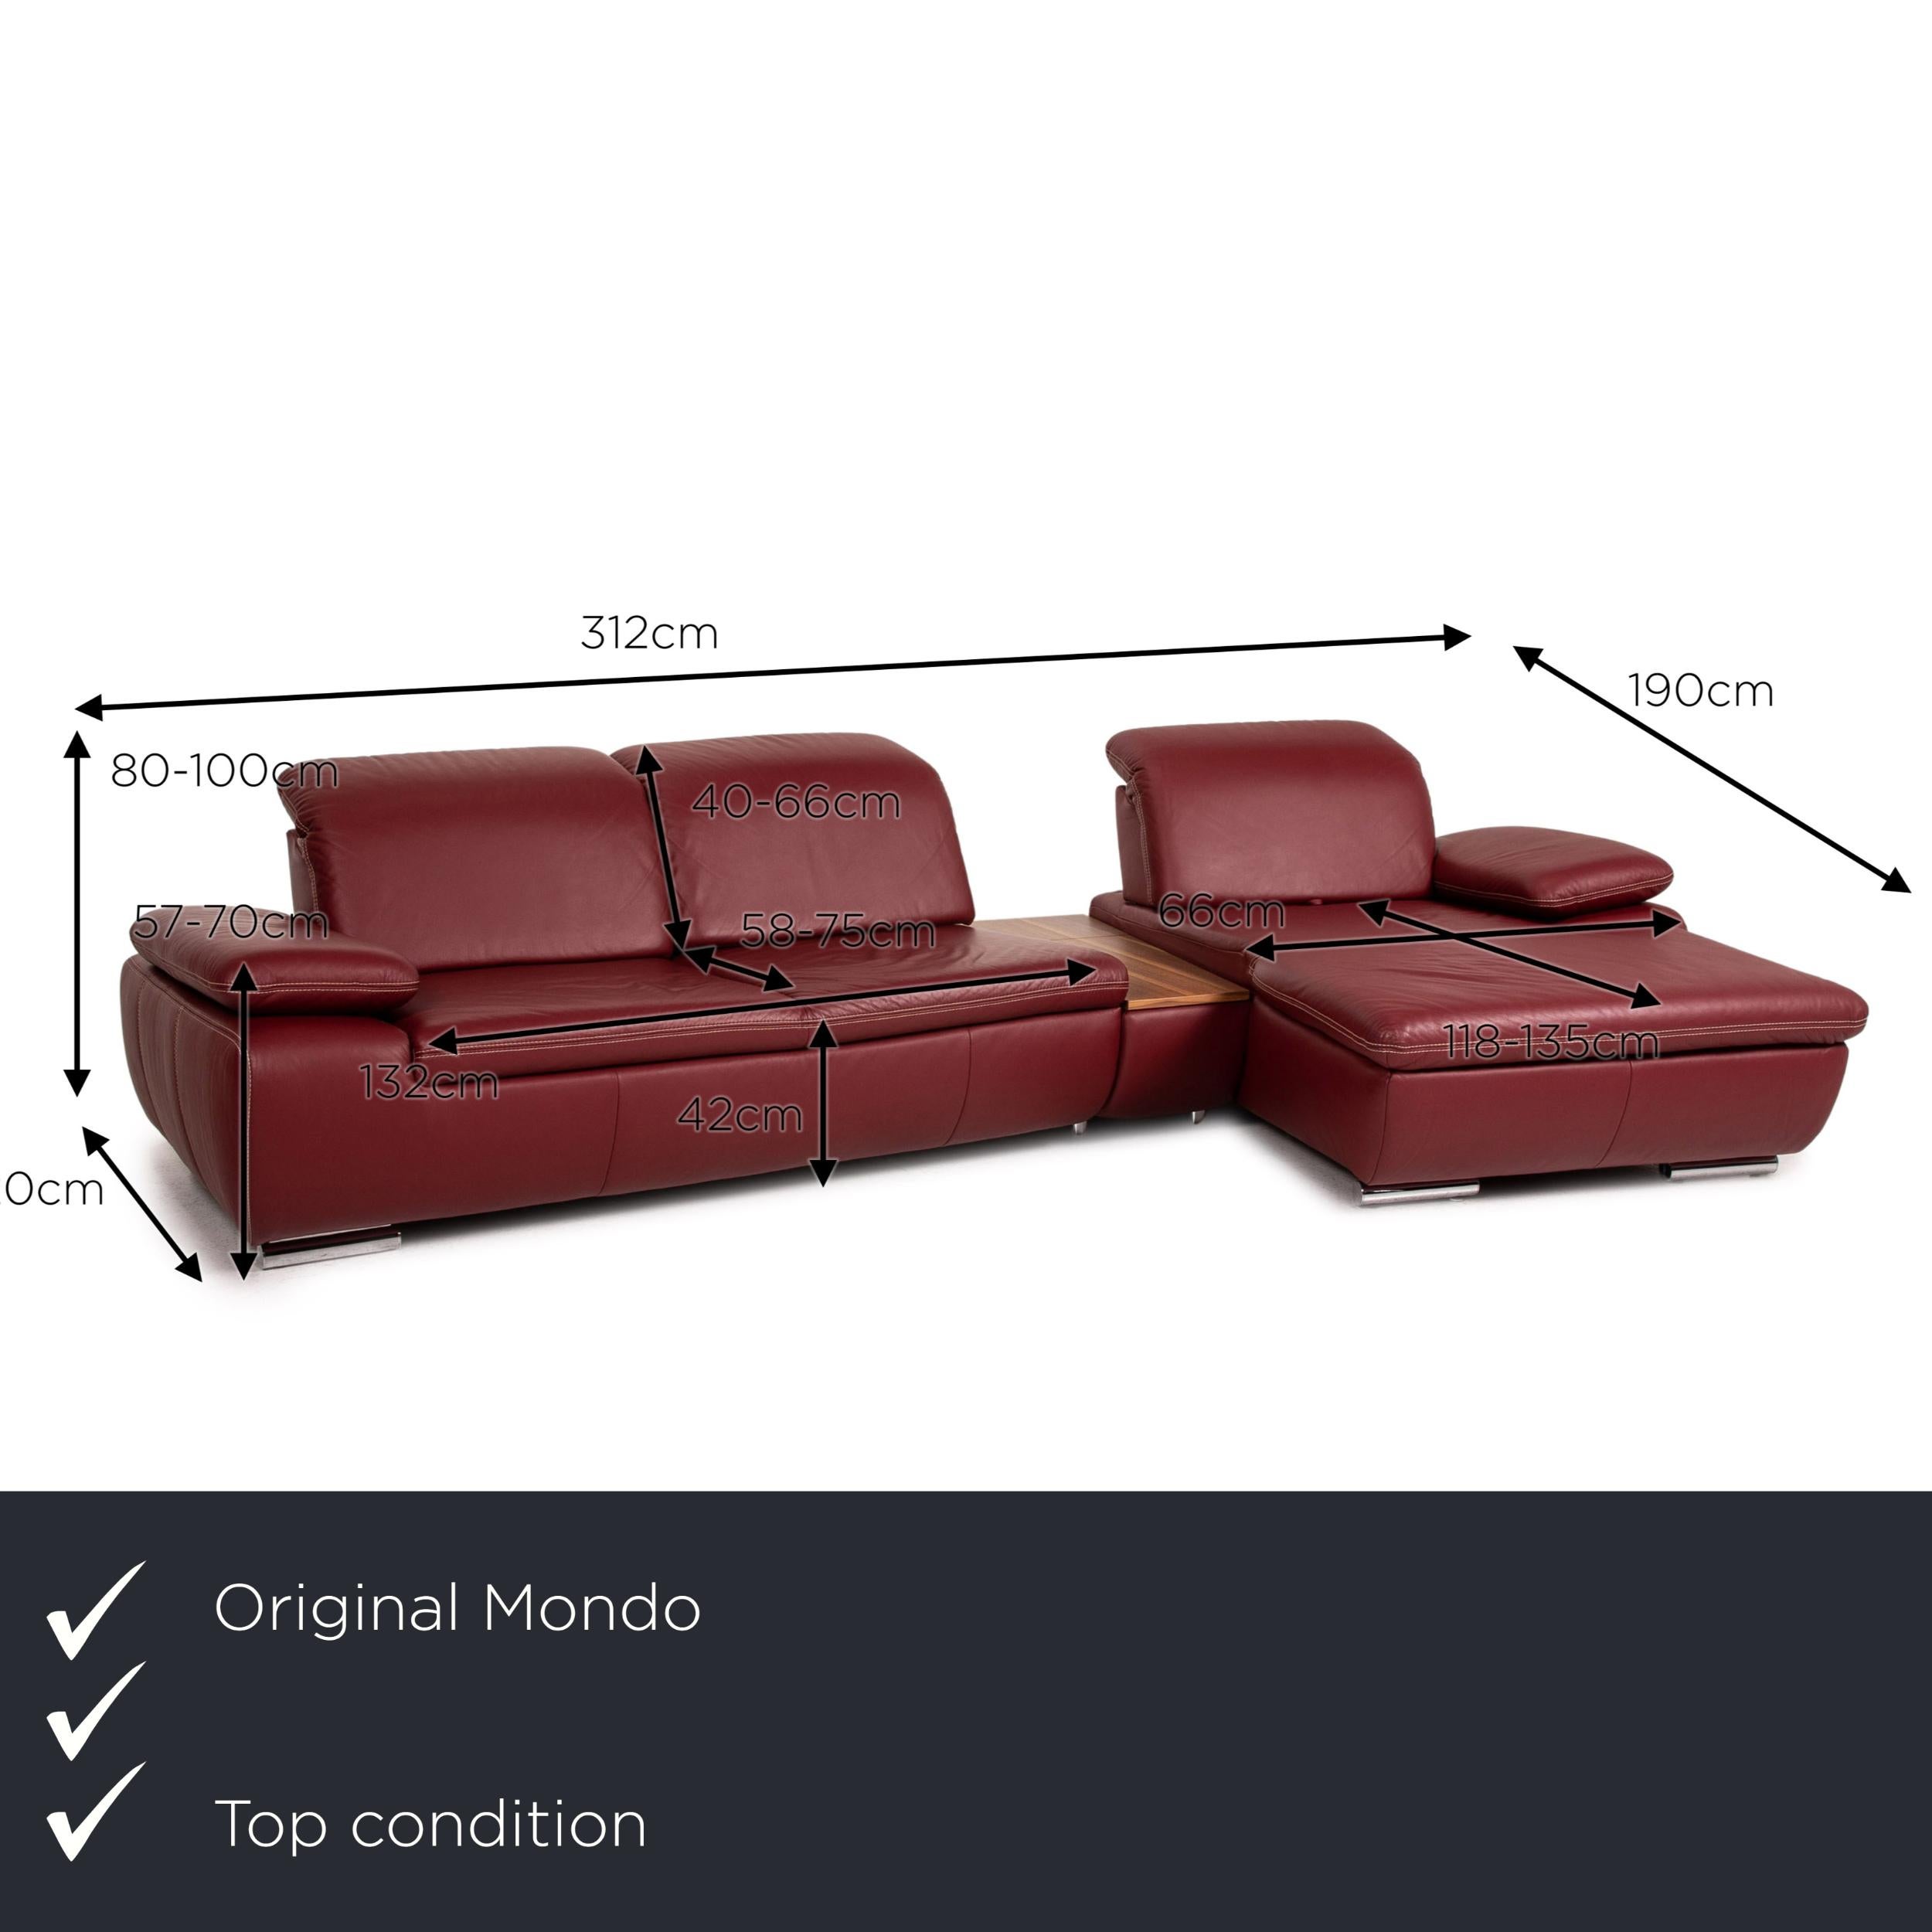 We present to you a Mondo Clair leather corner sofa red function couch.


 Product measurements in centimeters:
 

Depth: 120
Width: 312
Height: 80
Seat height: 42
Rest height: 57
Seat depth: 58
Seat width: 132
Back height: 40.
 